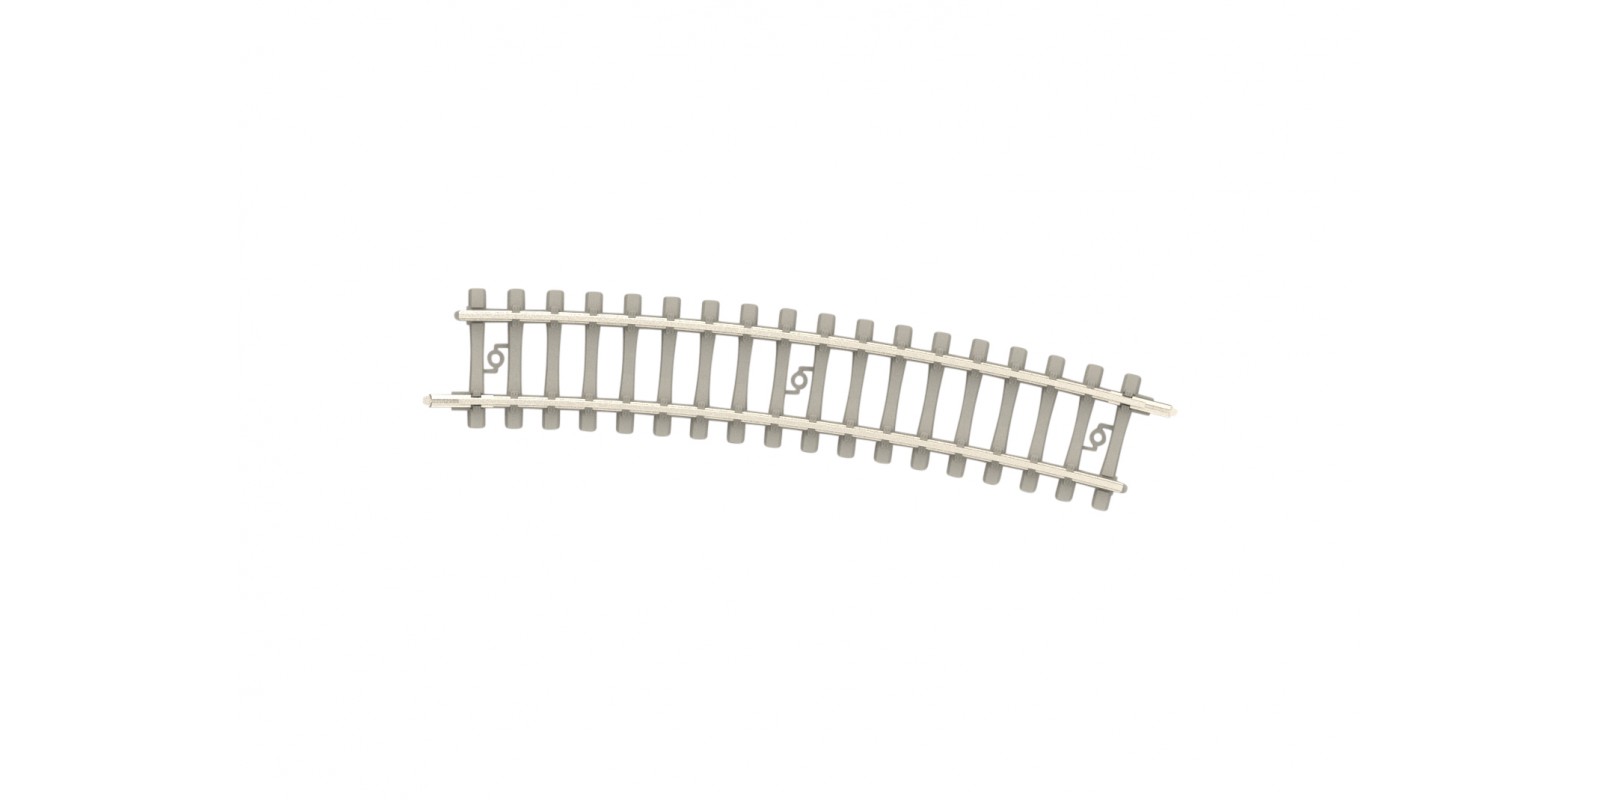 T14521 Curved Track with Concrete Ties